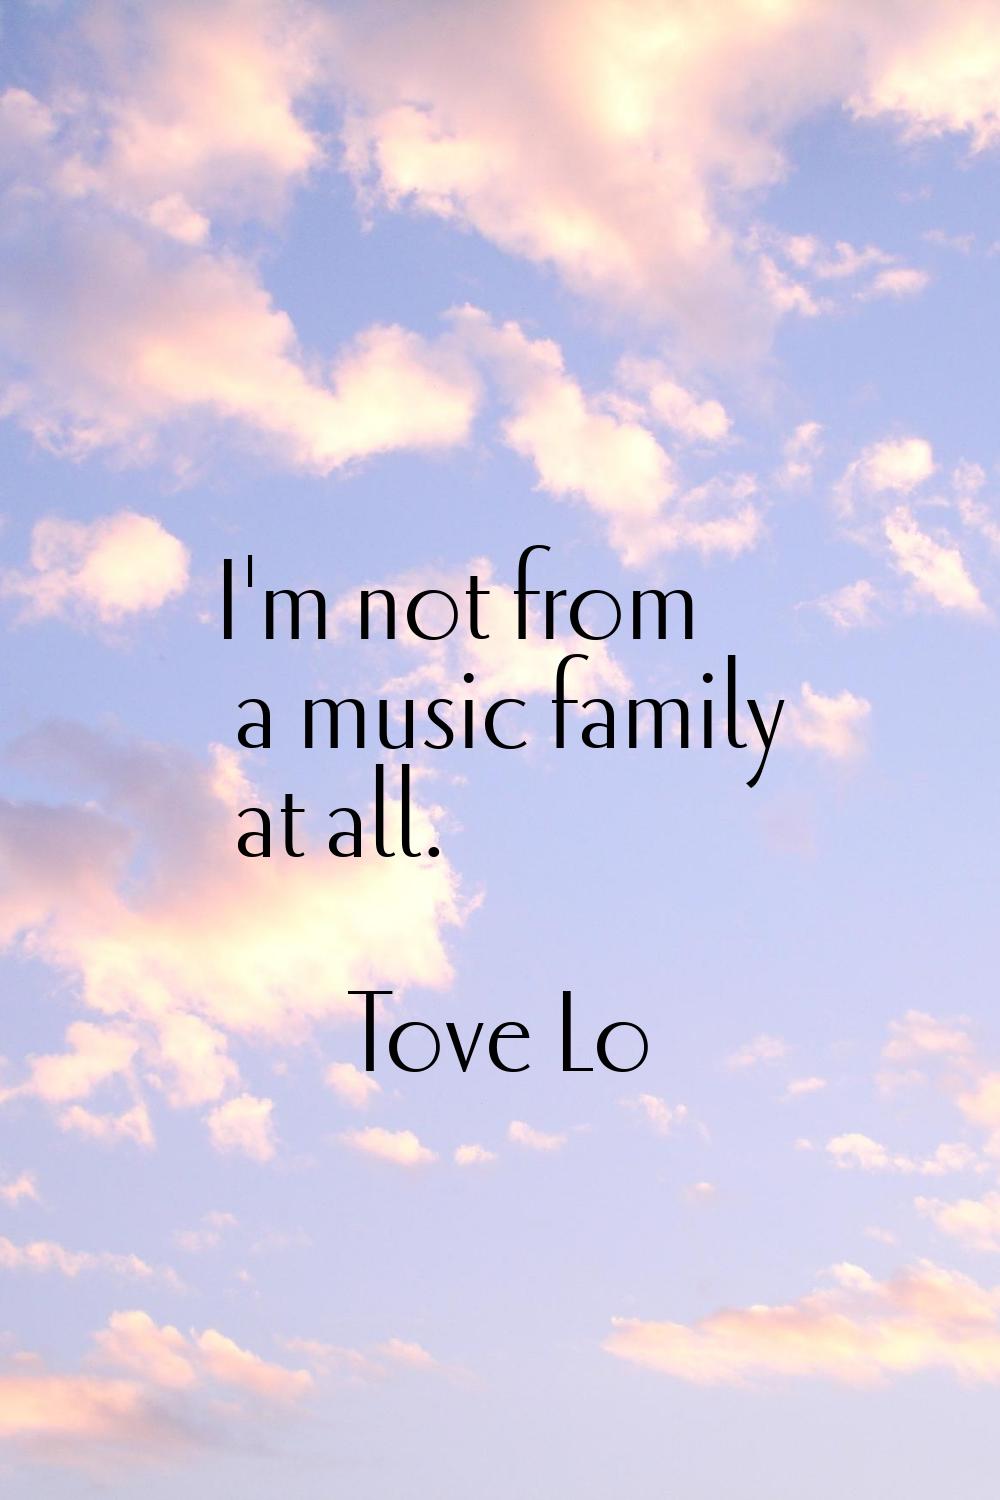 I'm not from a music family at all.